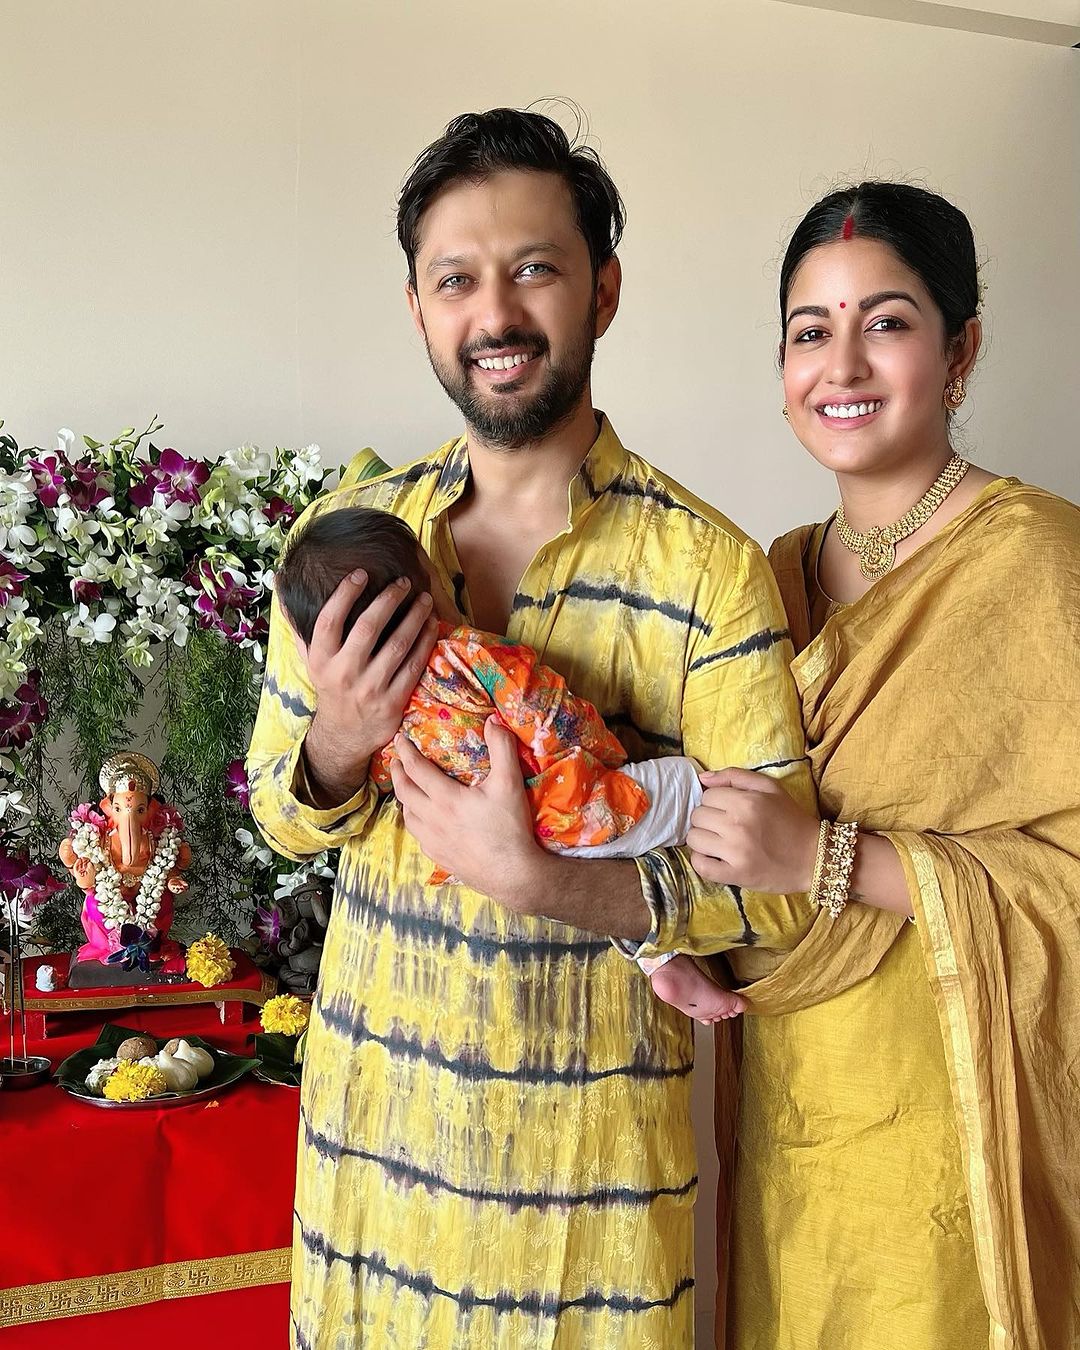 Ishita Dutta And Vatsal Sheth Went On A Trip With Their Parents And Says “It Was The First Trip For Vaayu”!